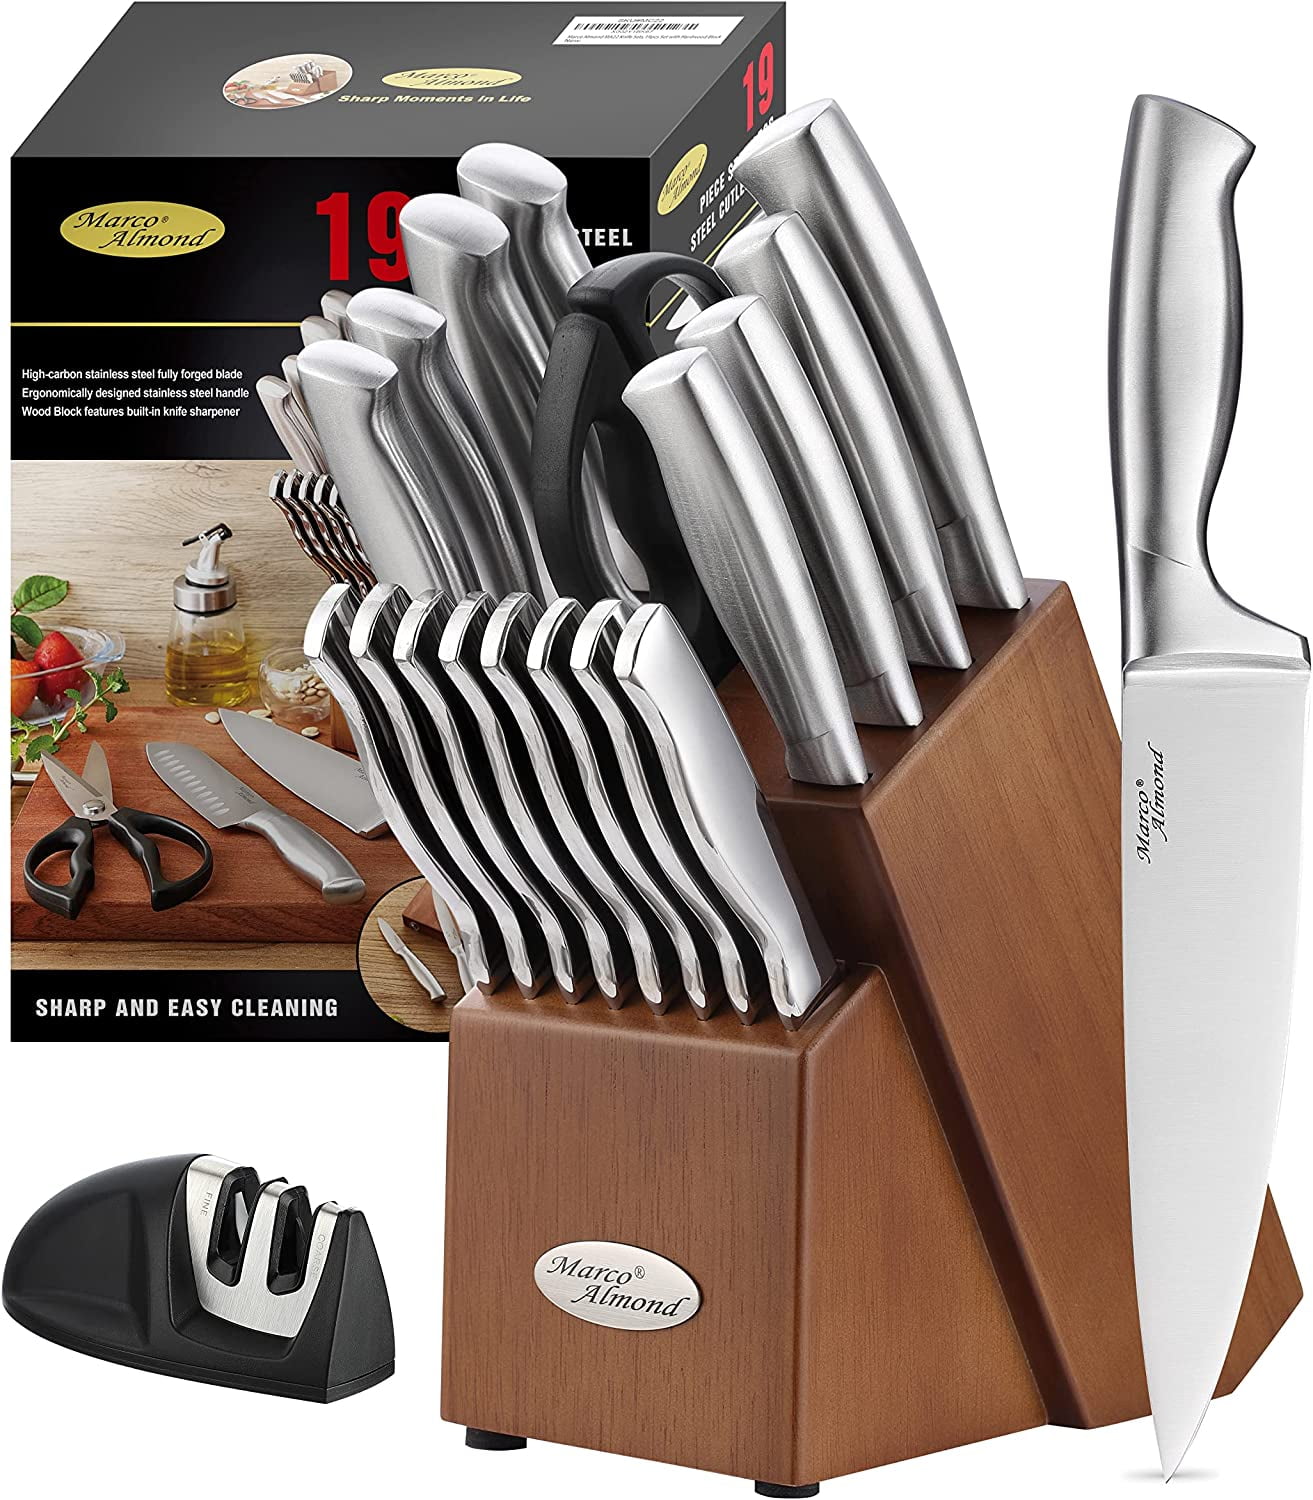 Marco Almond KYA26 14-Piece Knife Block Set with Built-in Sharpener,Stainless  Steel knife set